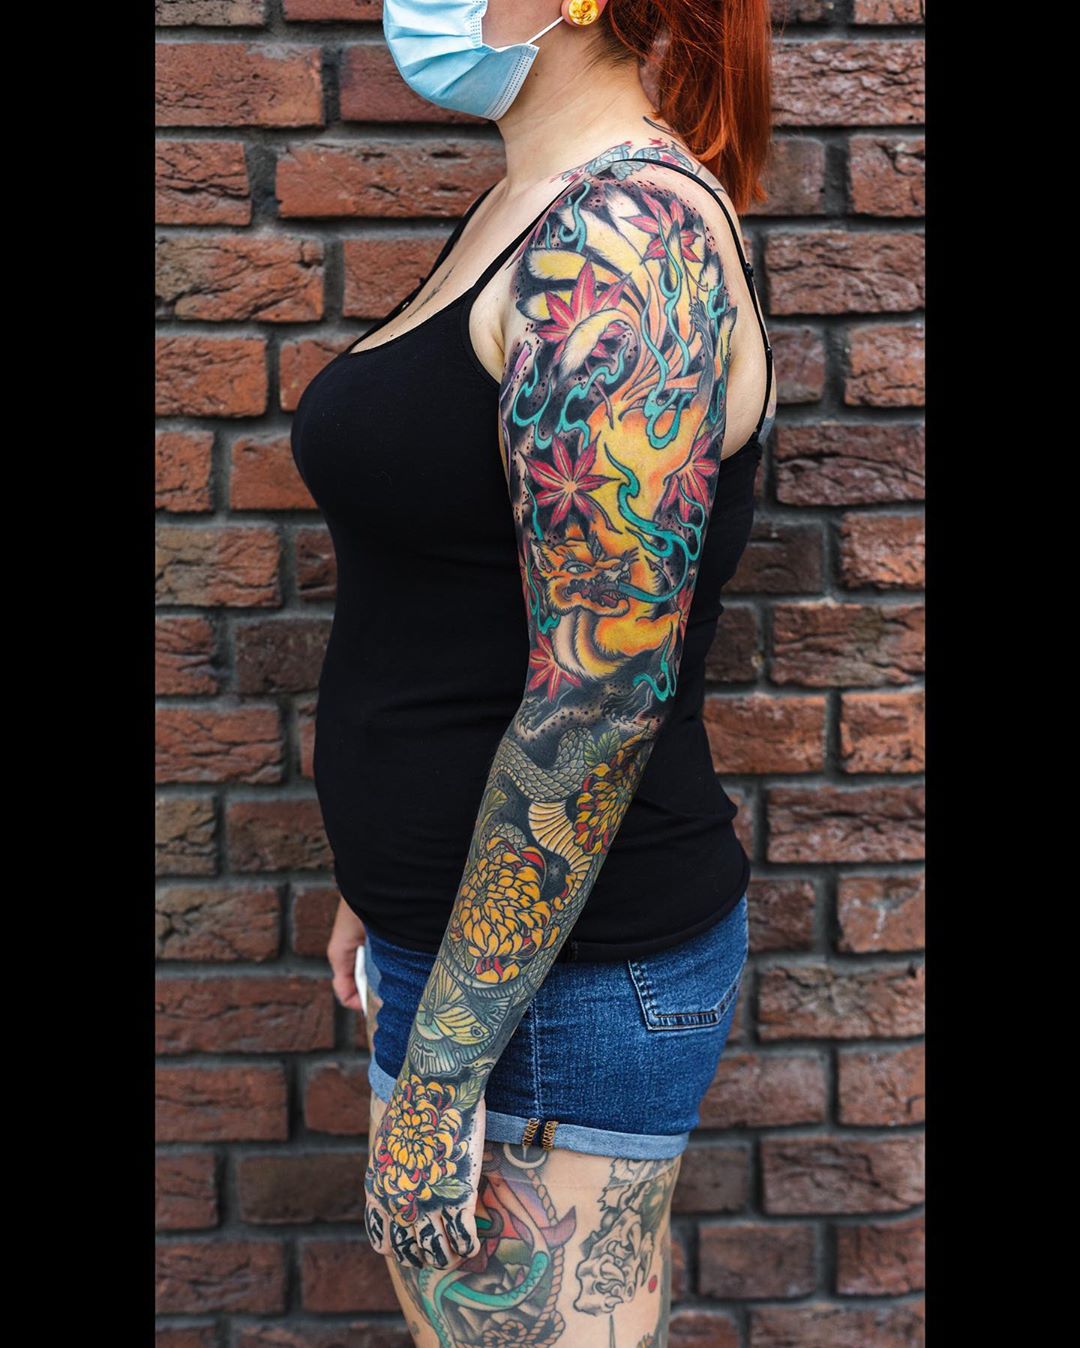 Finally finished with @julietta.weimer full sleeve project - so much fun! 
Swipe...